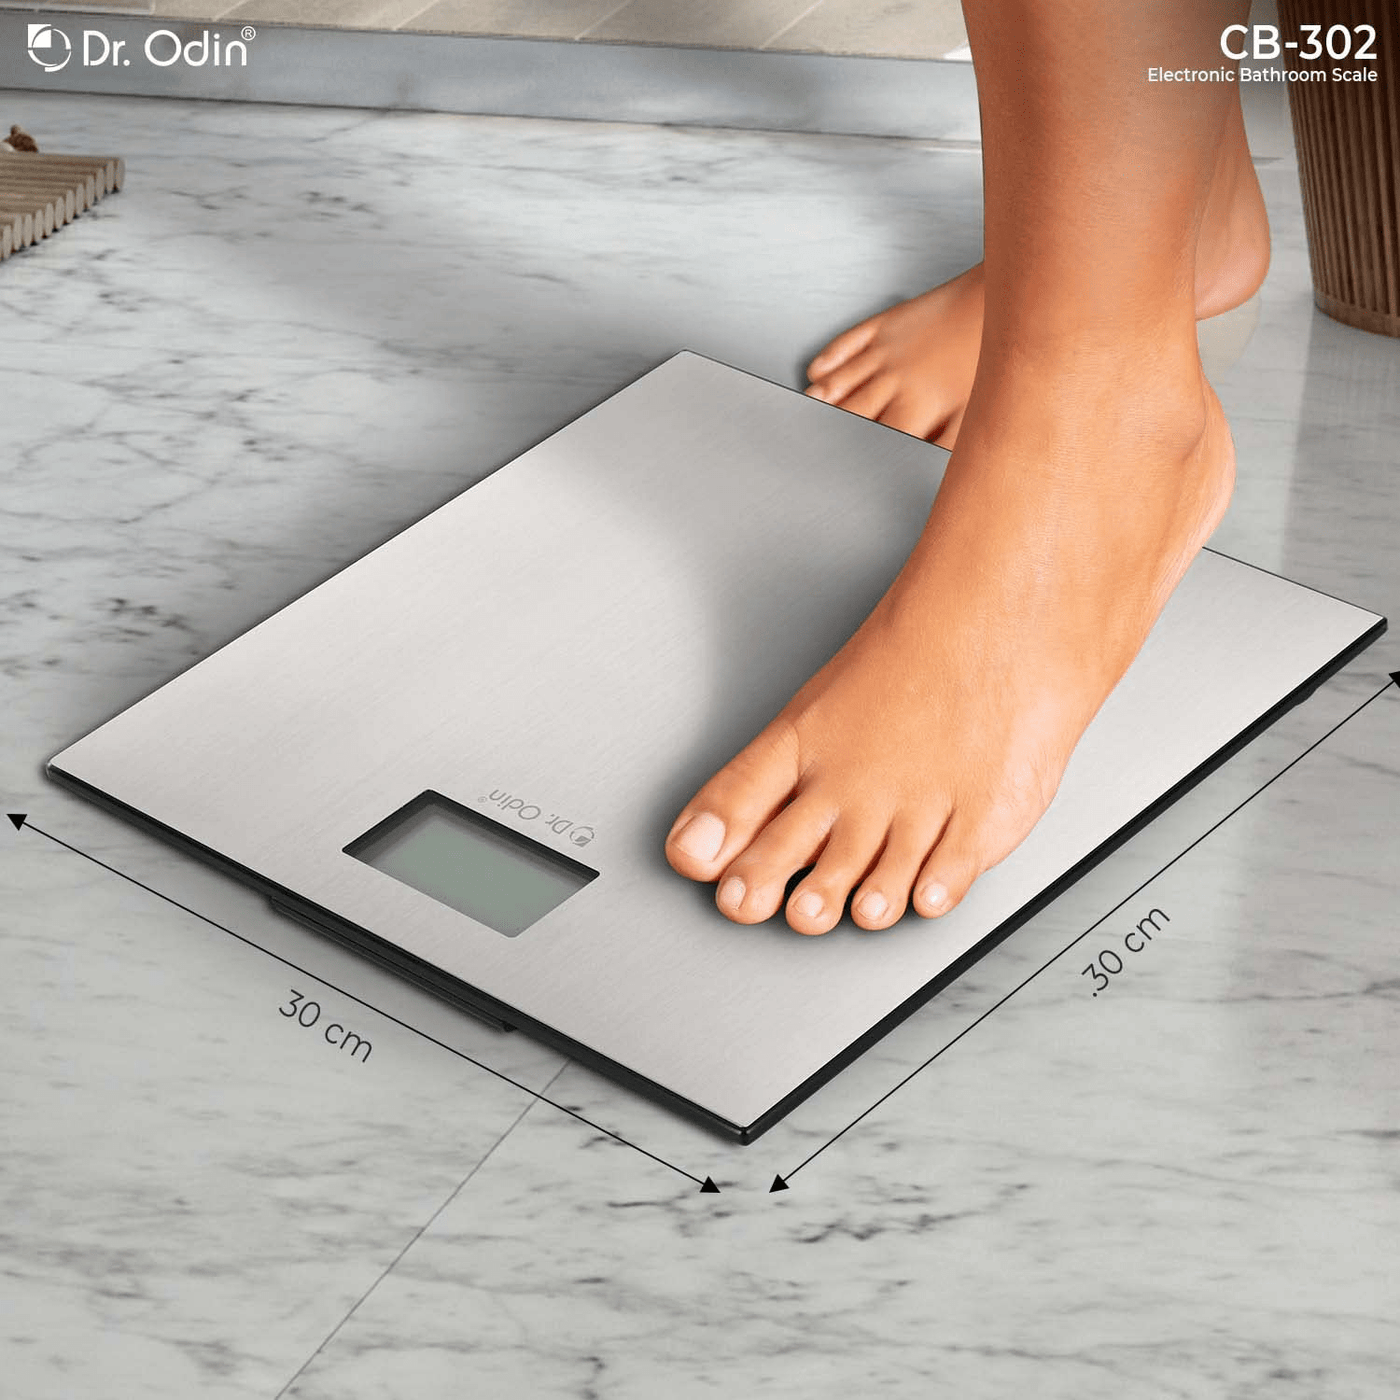 Dr Odin Bathroom (Personal) Weighing Scale With LDC Display & Automatic On Technology CB-302